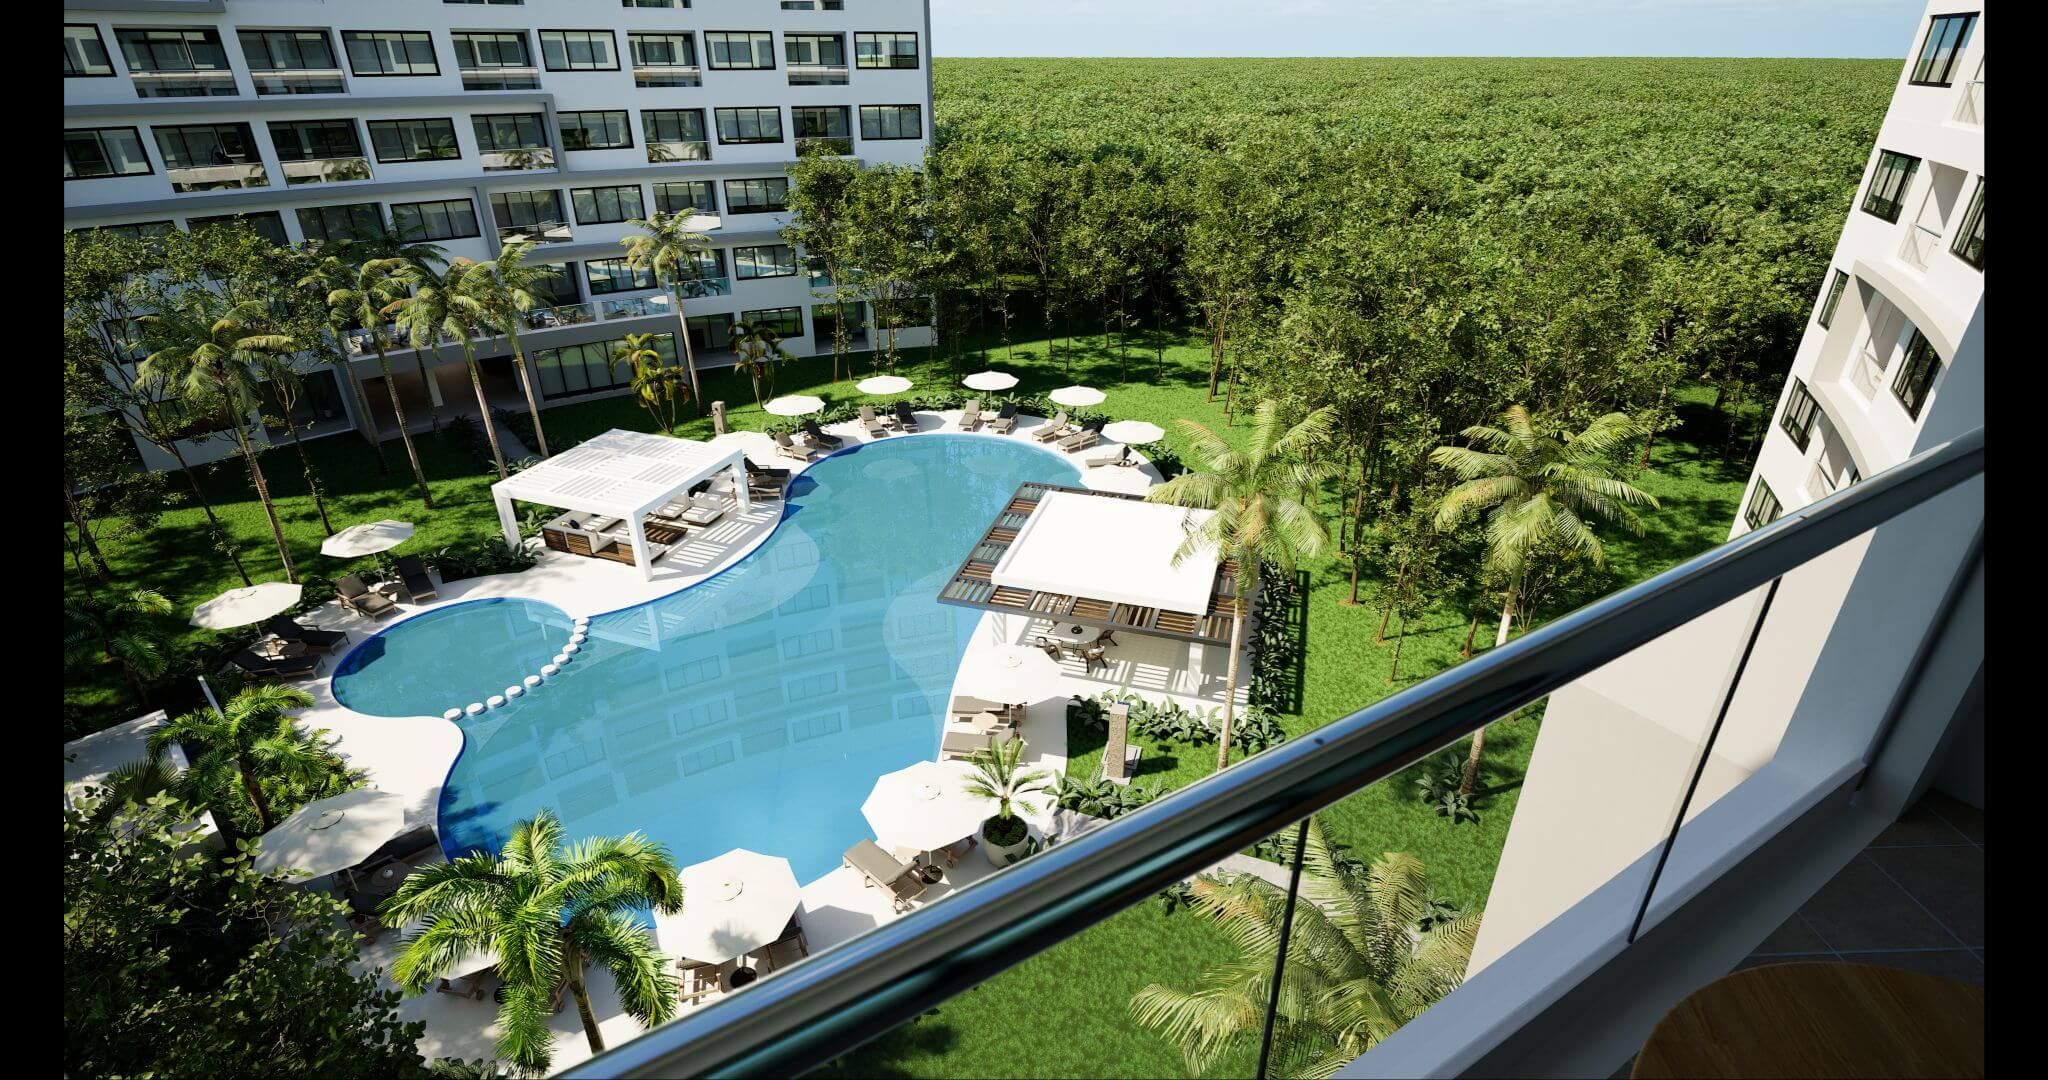 Apartment in Playacar, with 4 pools, playground for children, Pet zone, gym, clubhouse, restaurant, terrace bar, concierge and more, for sal